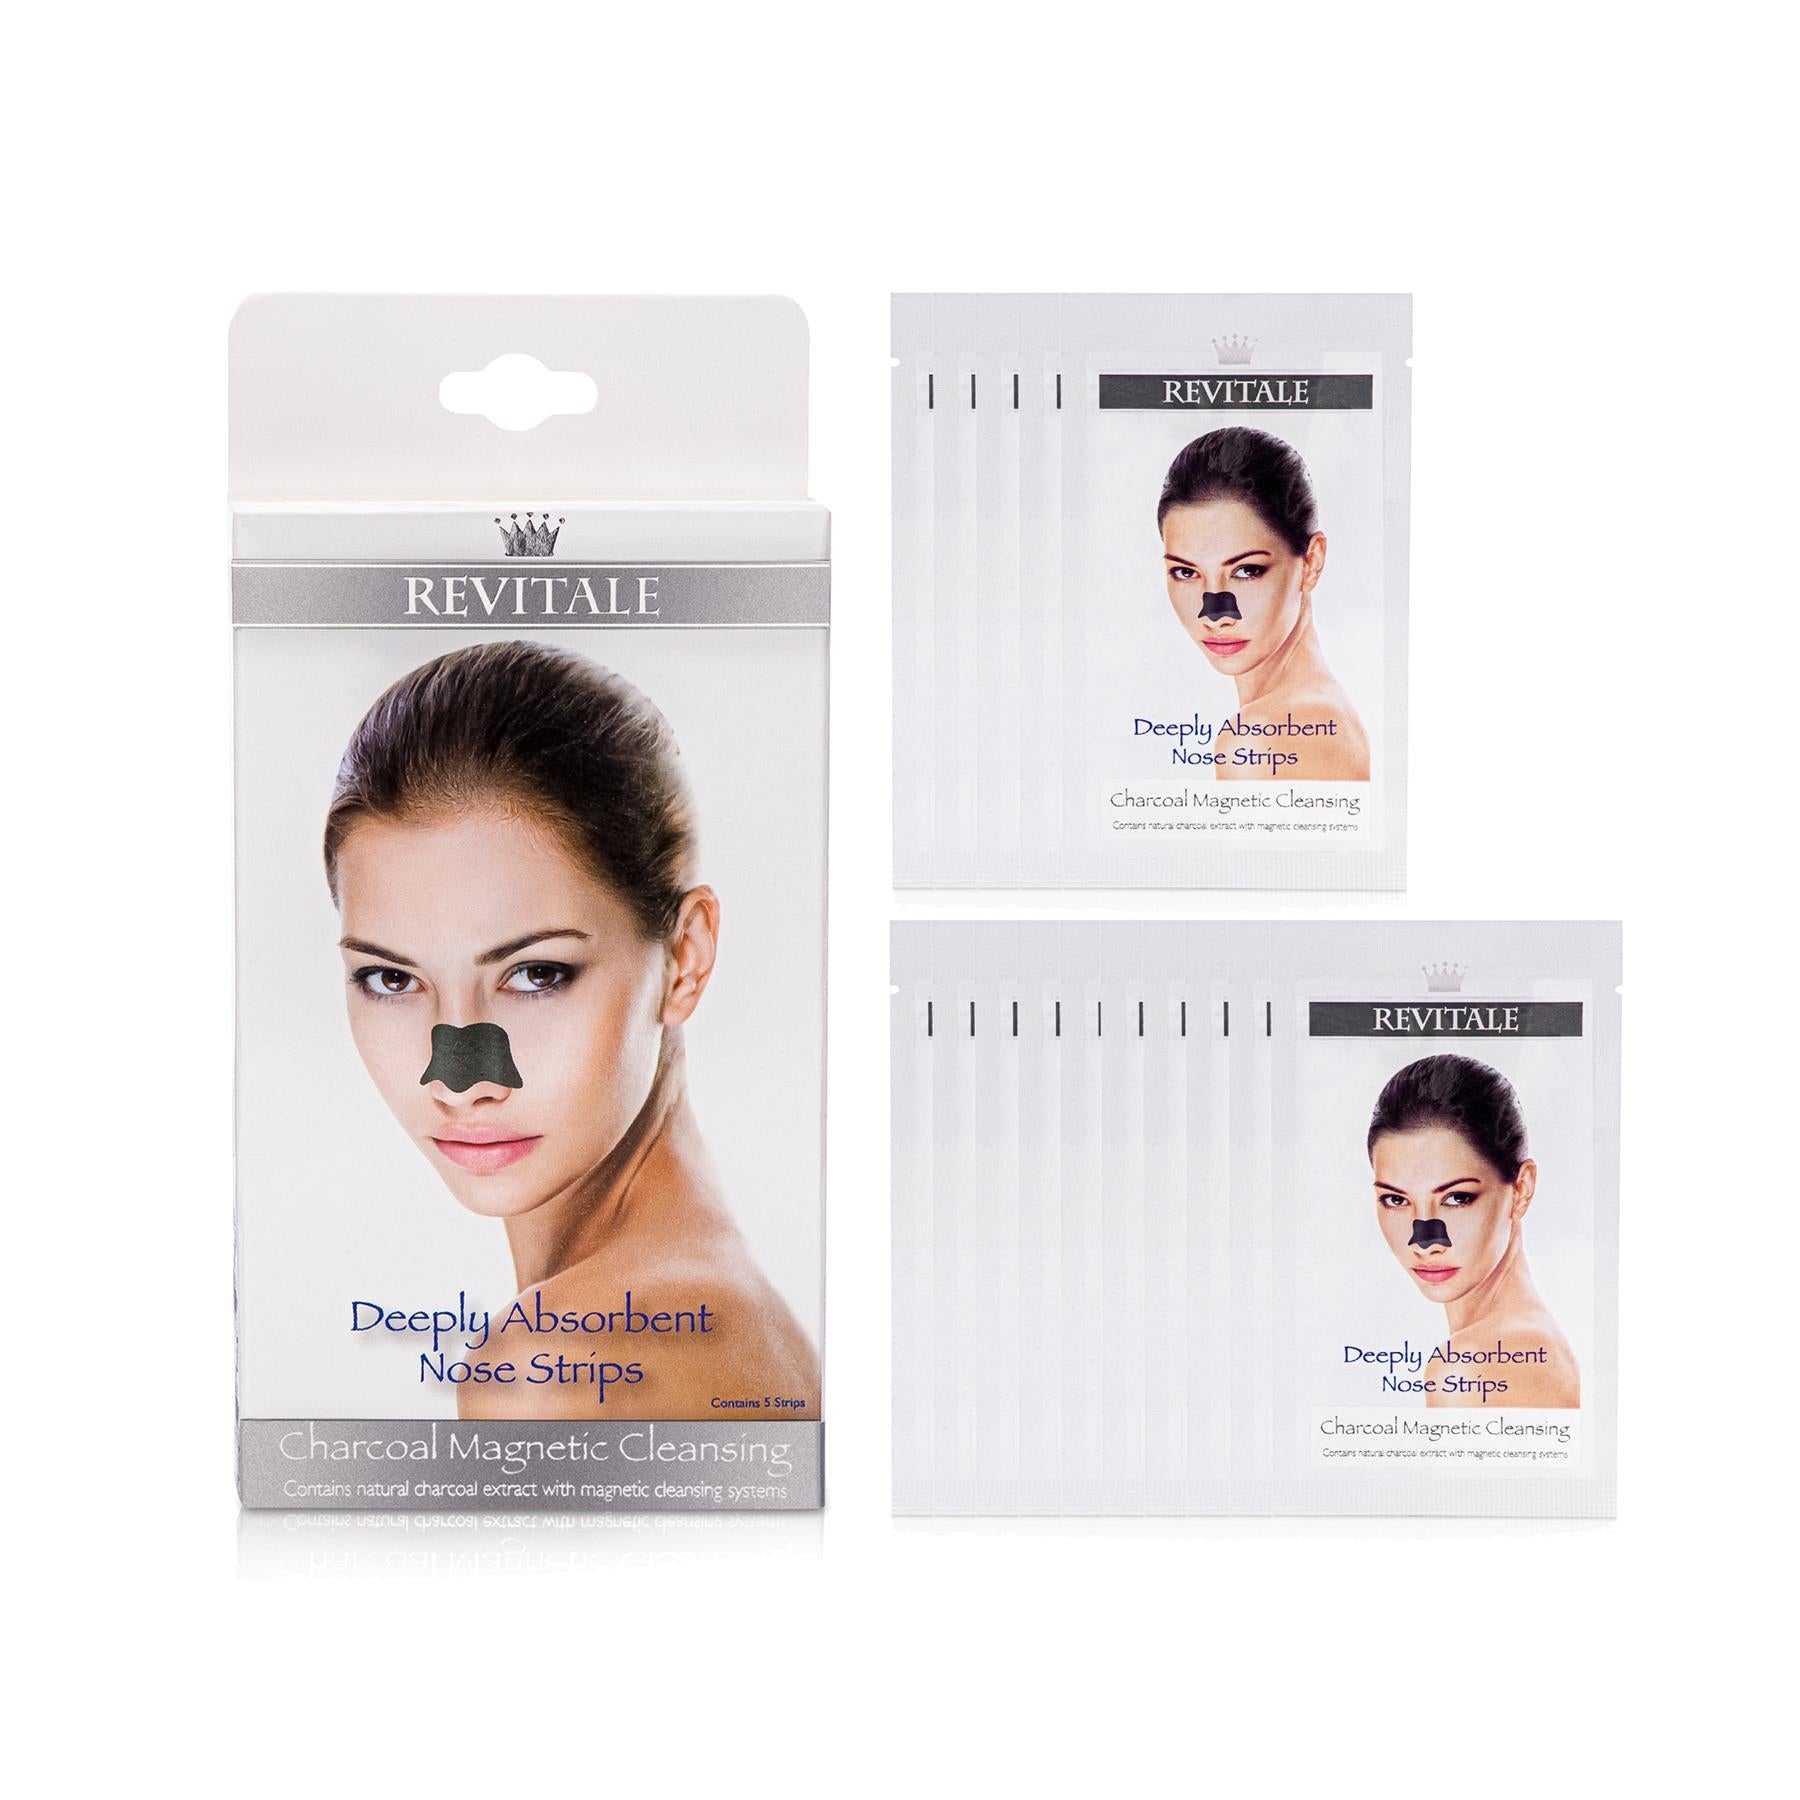 Revitale Charcoal Deep Magnetic Cleansing Nose Pore Strips picture